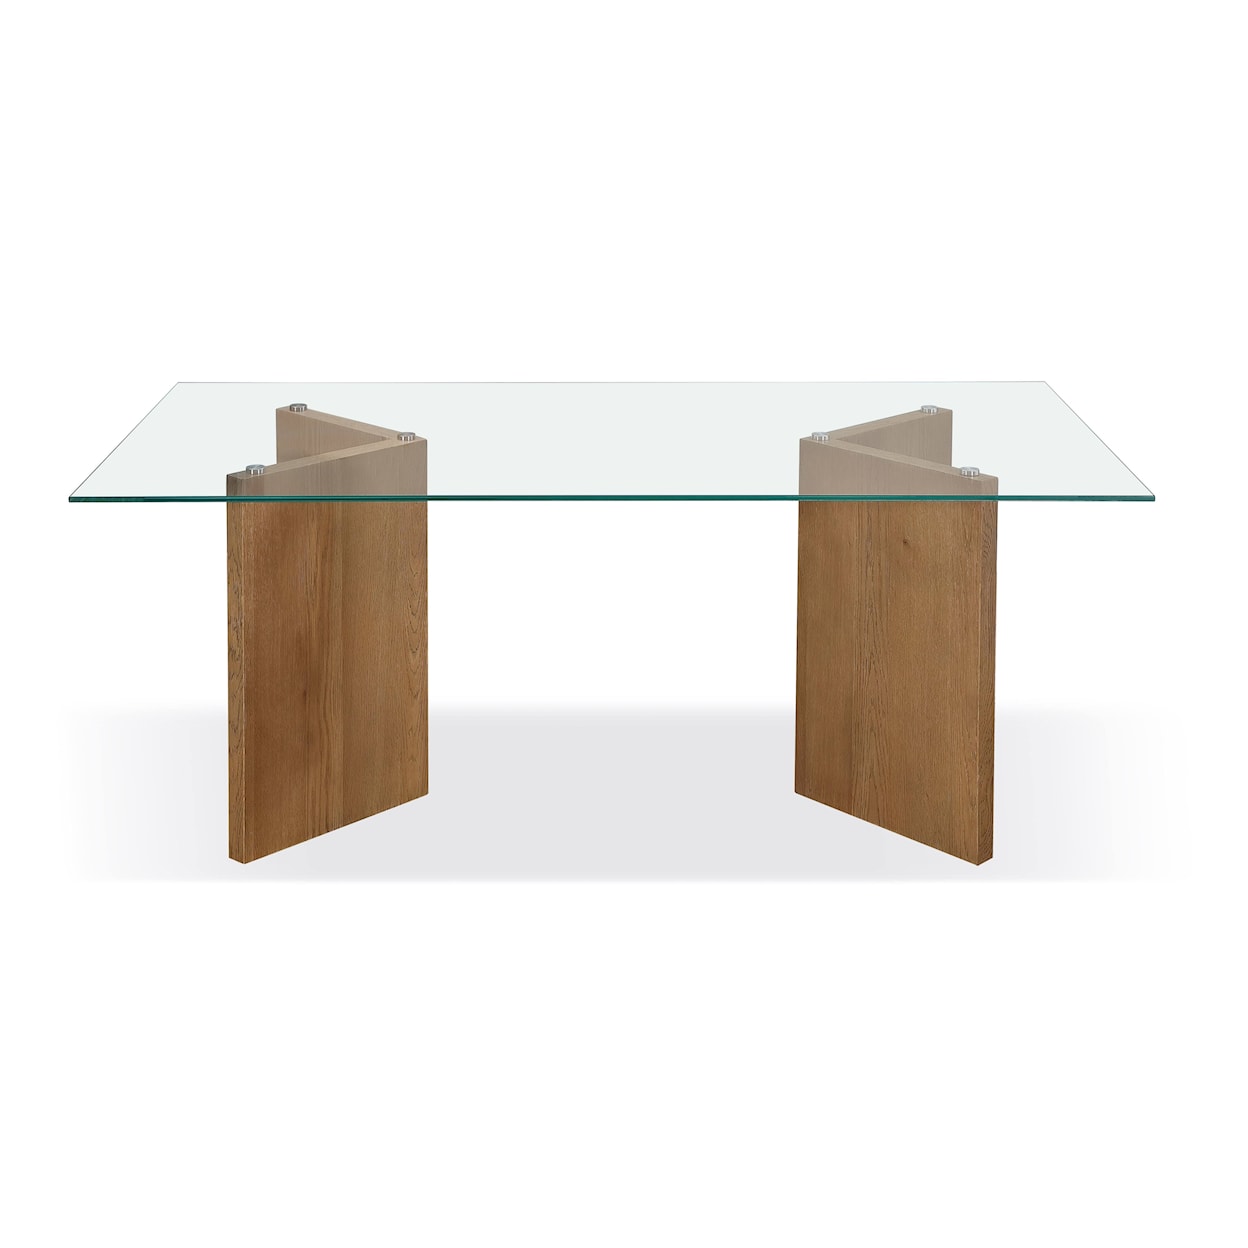 Modus International One Dining Table - UCG/Bisque